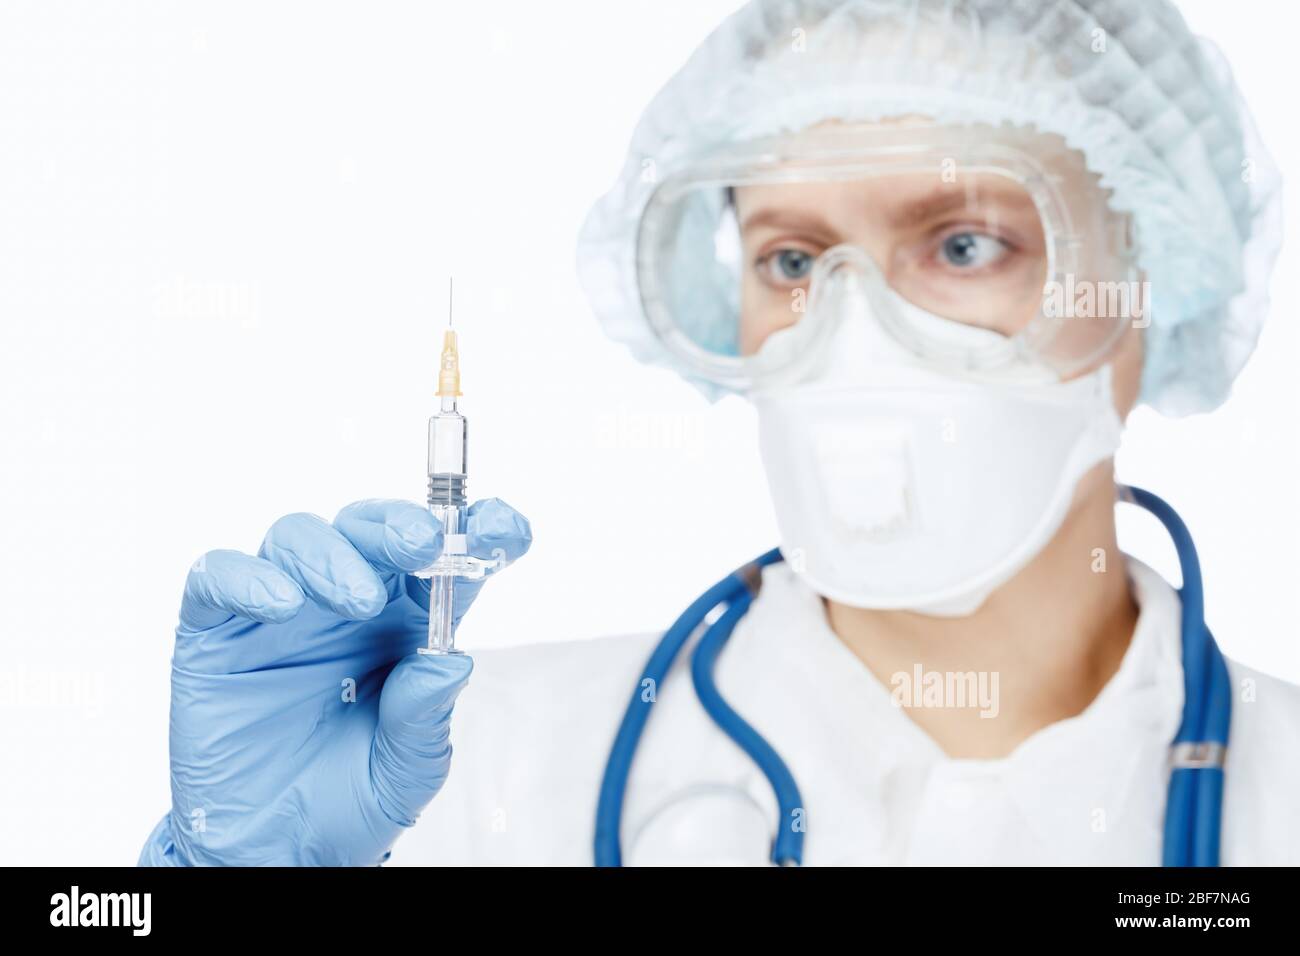 Close-up shot of doctor wearing protective suit, goggles and surgical mask holding syringe ready for injection Stock Photo